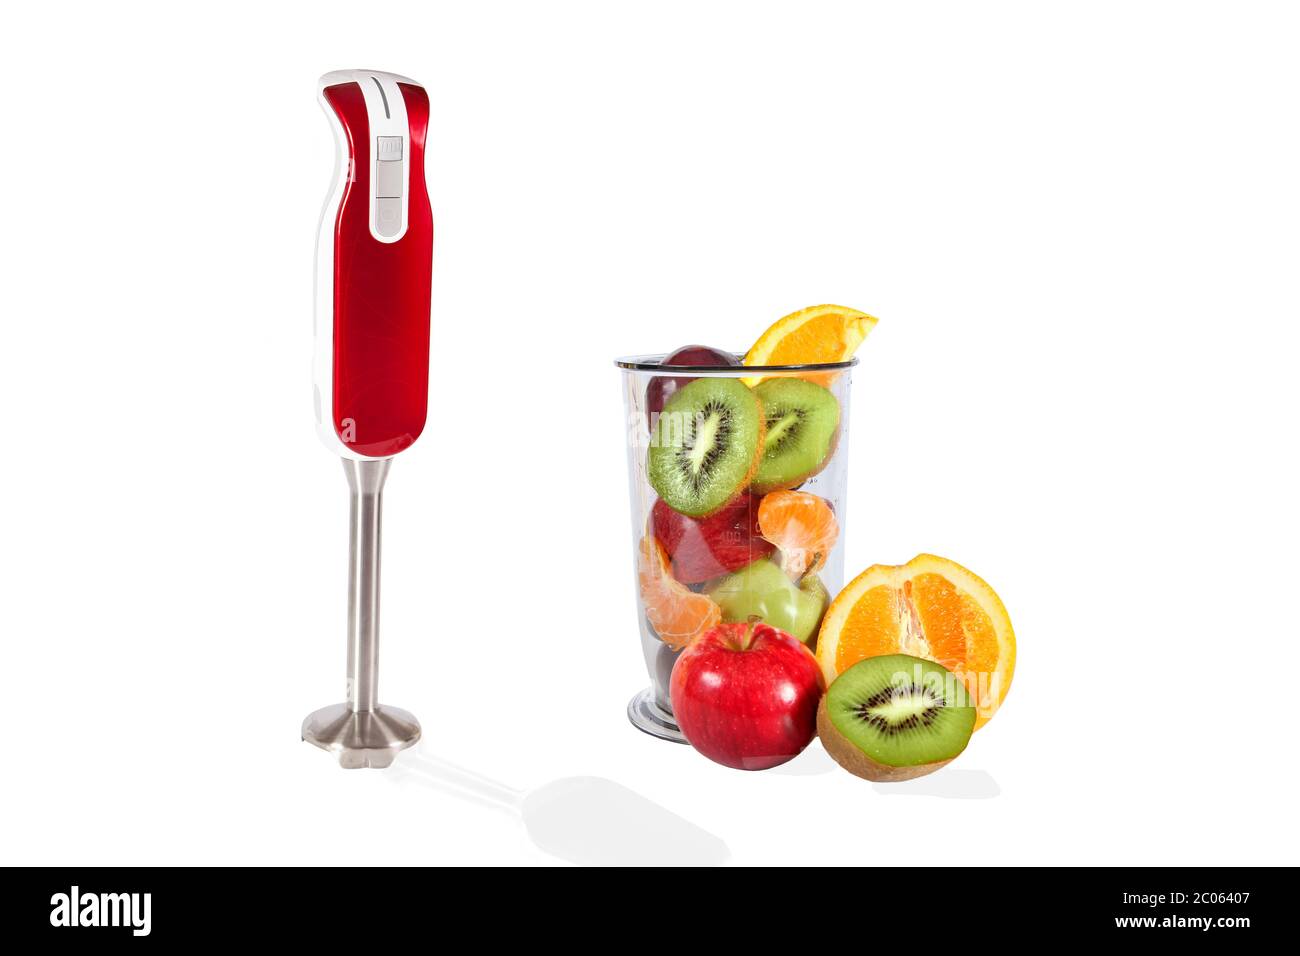 Small electric blender and fresh fruits Stock Photo